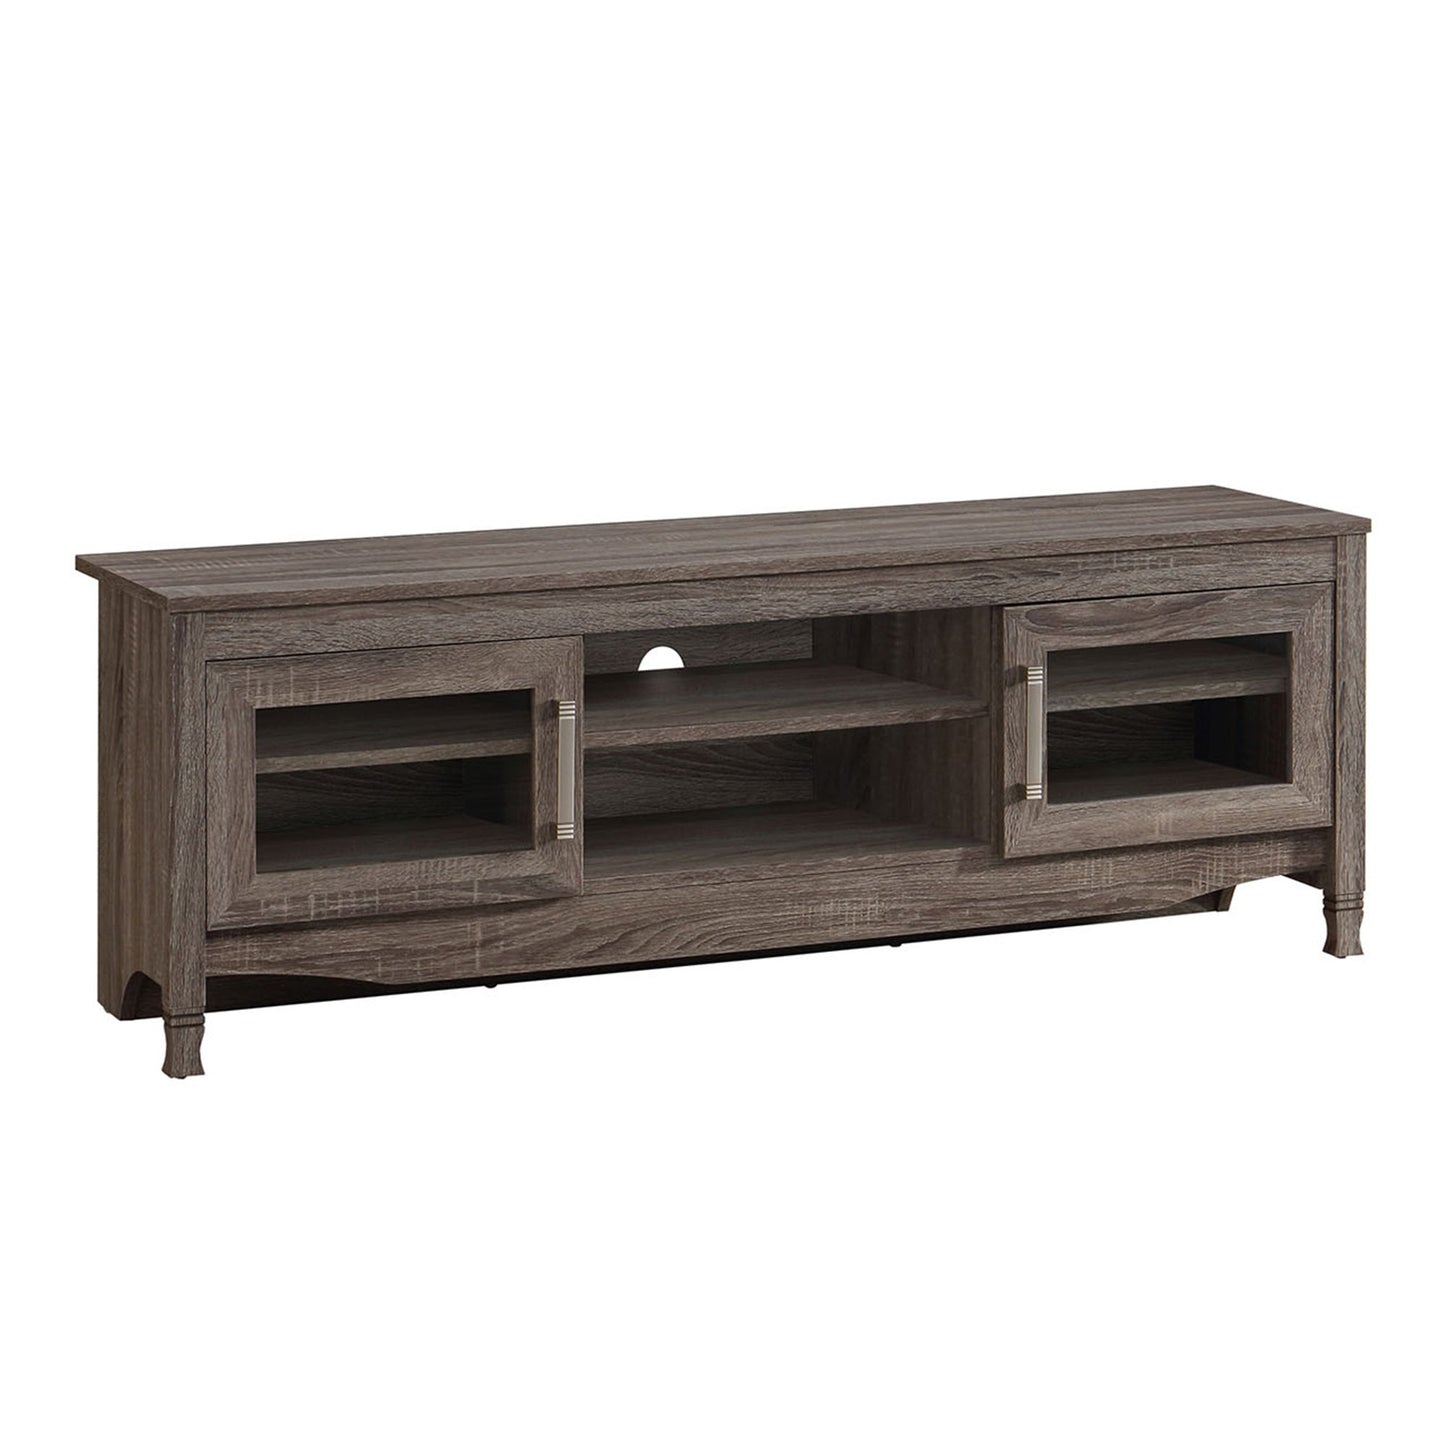 Techni Mobili Grey Driftwood TV Stand Home Decor by Design